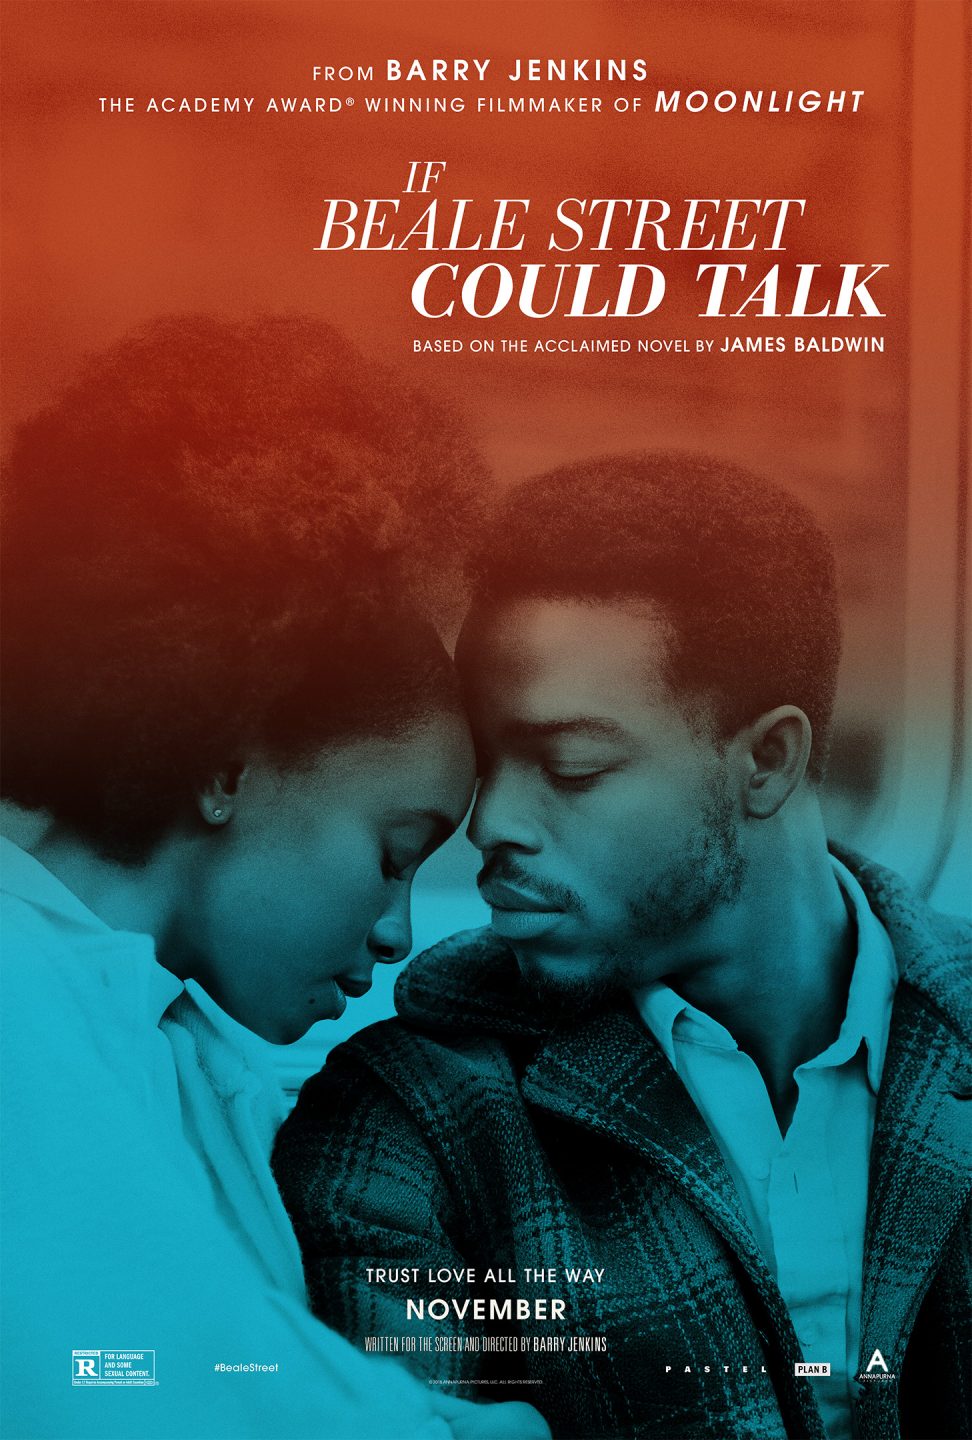 If Beale Street Could Talk poster (Annapurna Pictures)